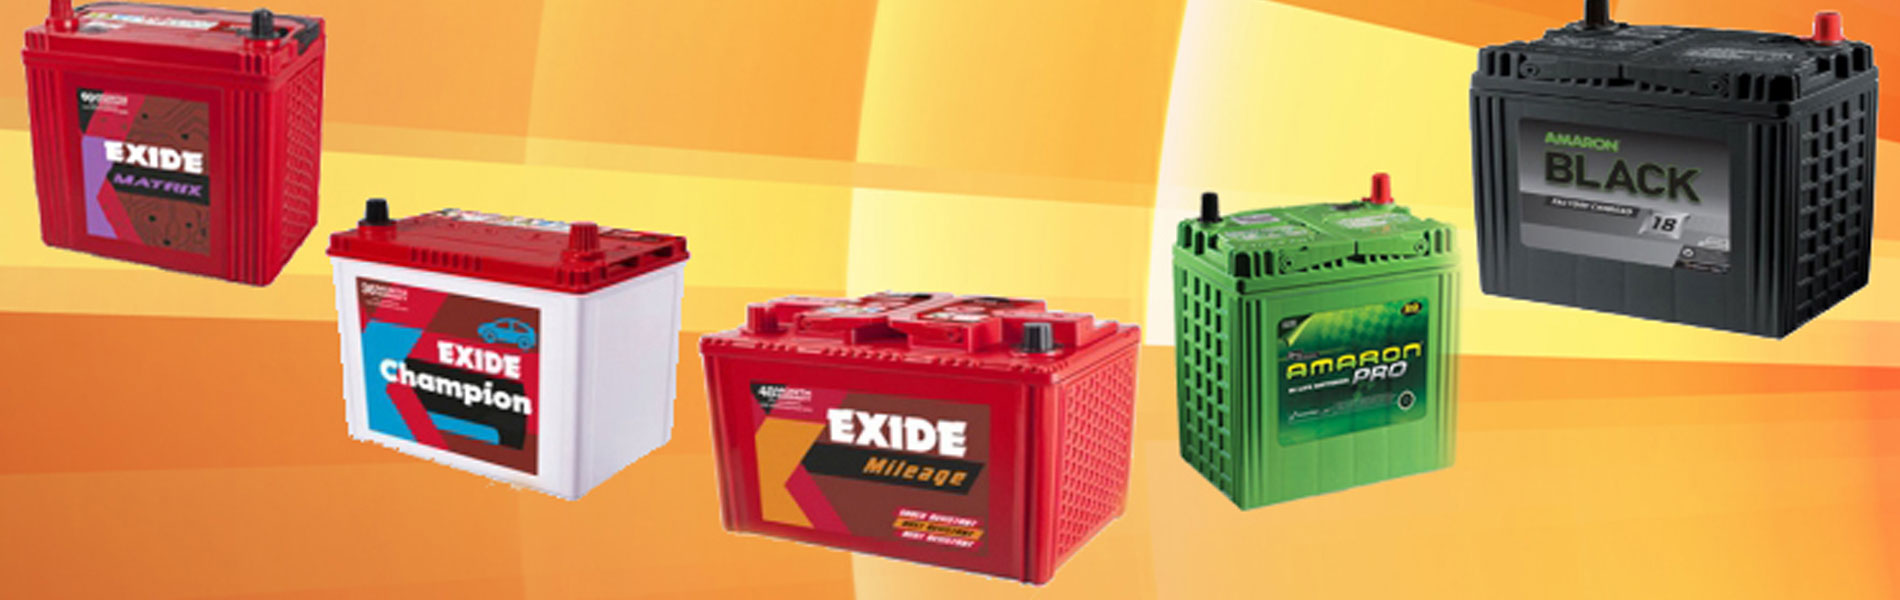 Battery Dealers Mumbai, Thane, Battery Dealers Near me at Best Price